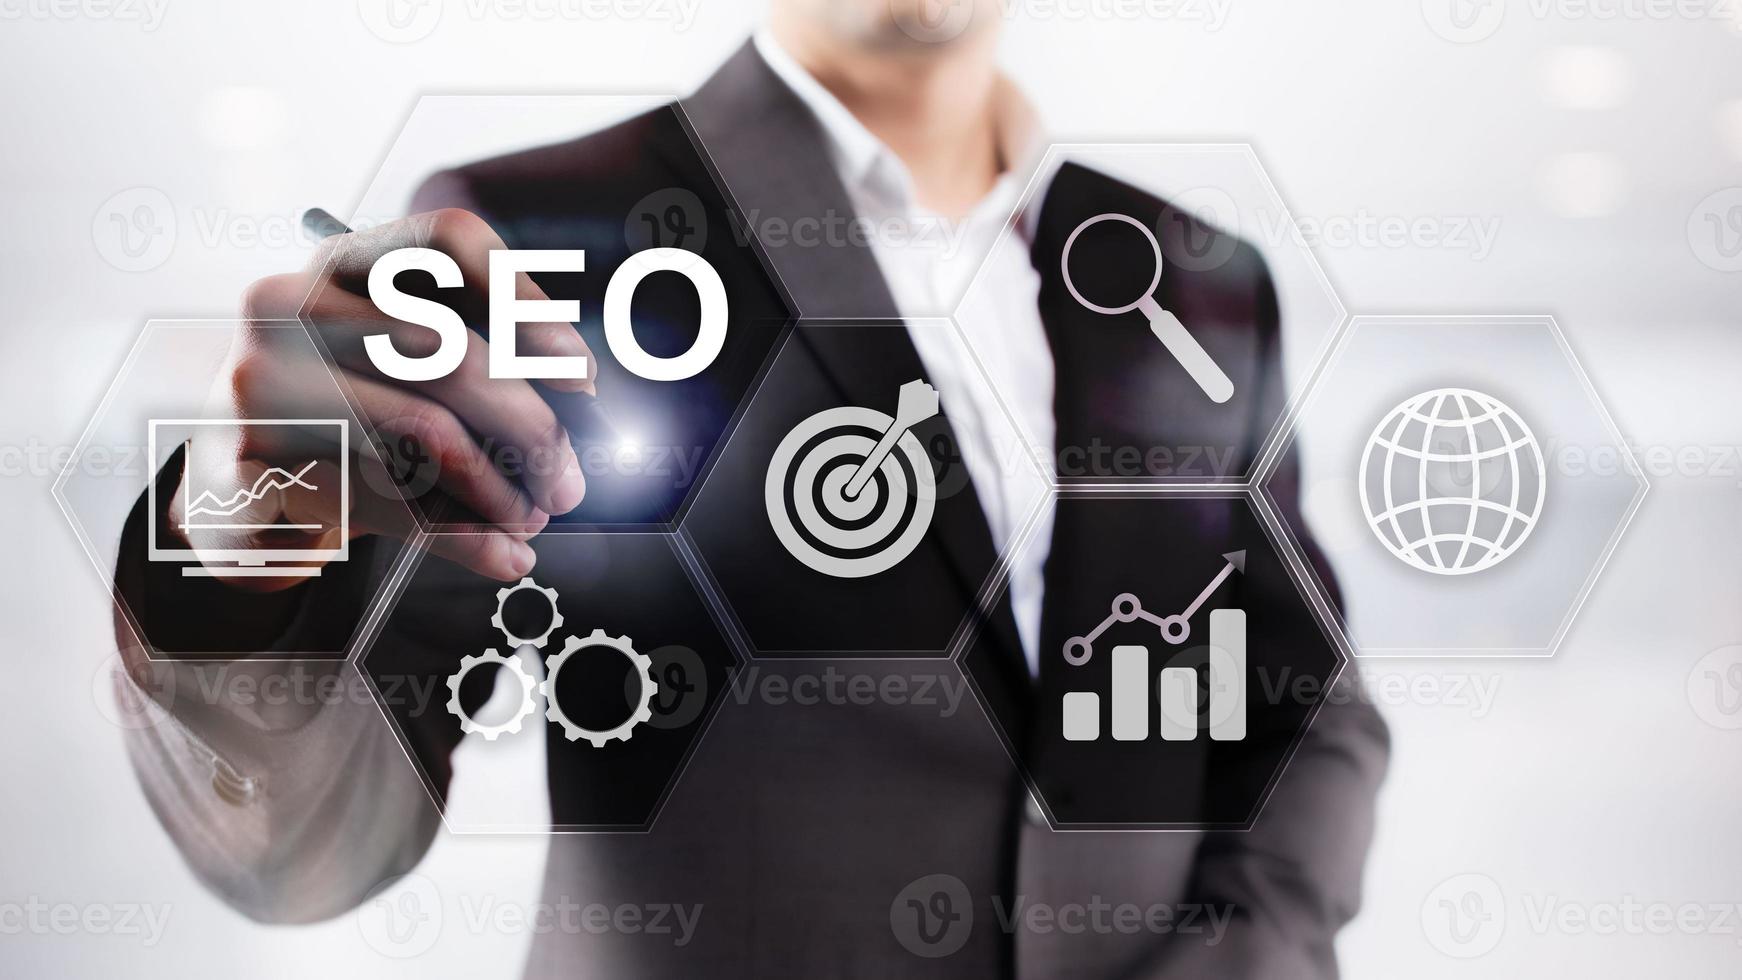 SEO - Search engine optimization, Digital marketing and internet technology concept on blurred background photo